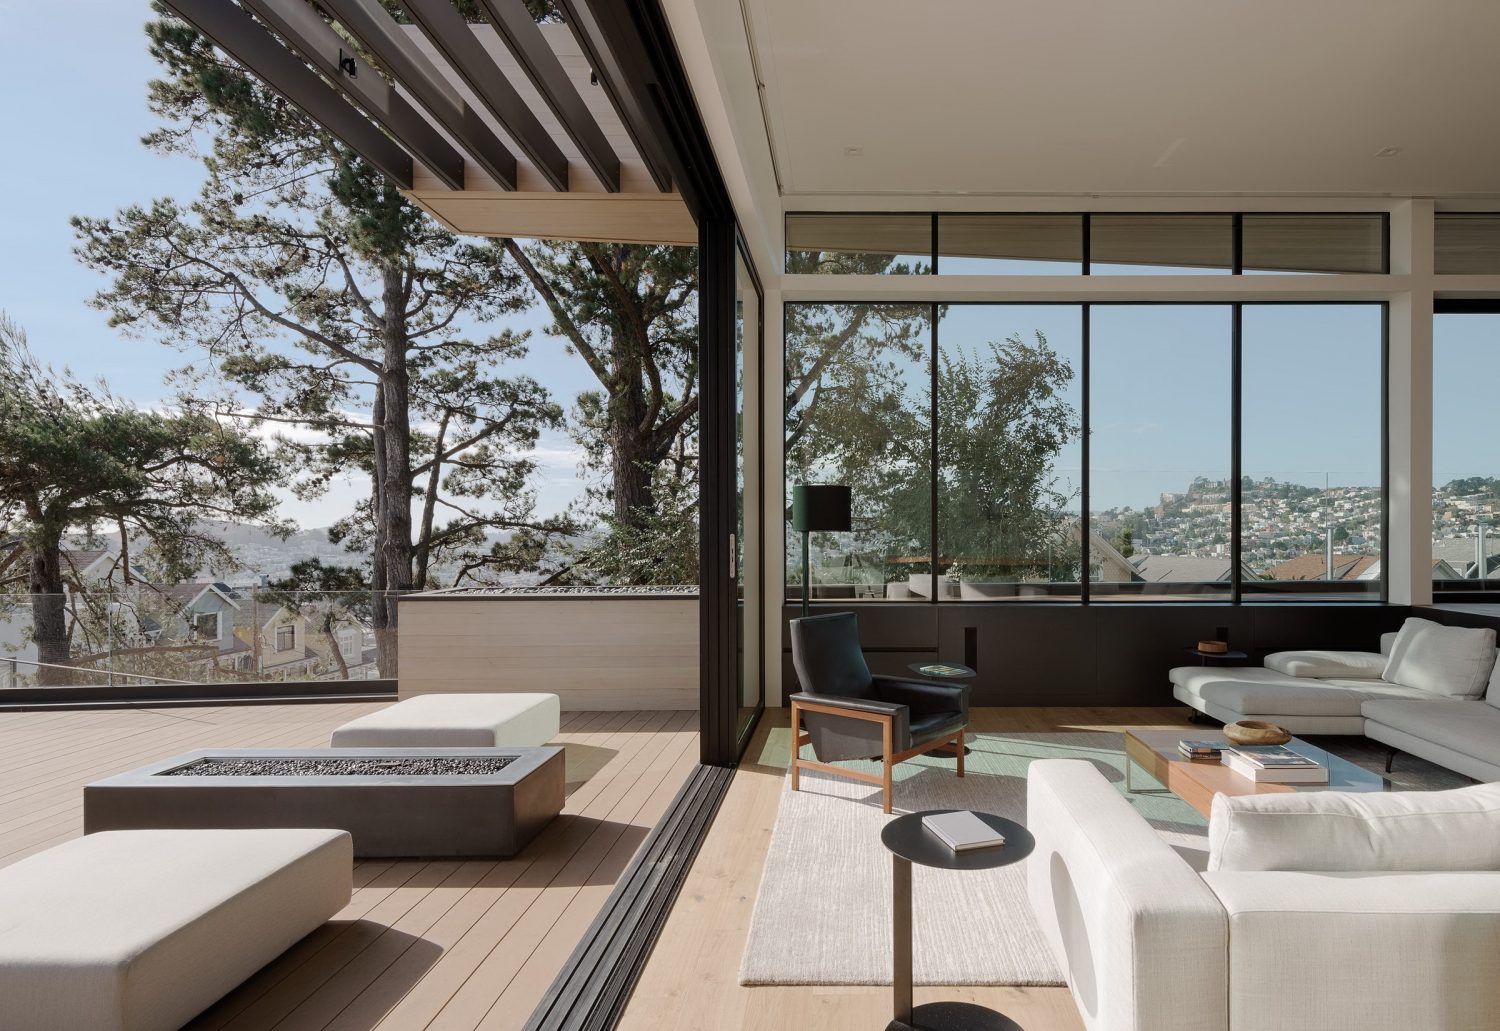 Dolores Heights Residence by John Maniscalco Architecture